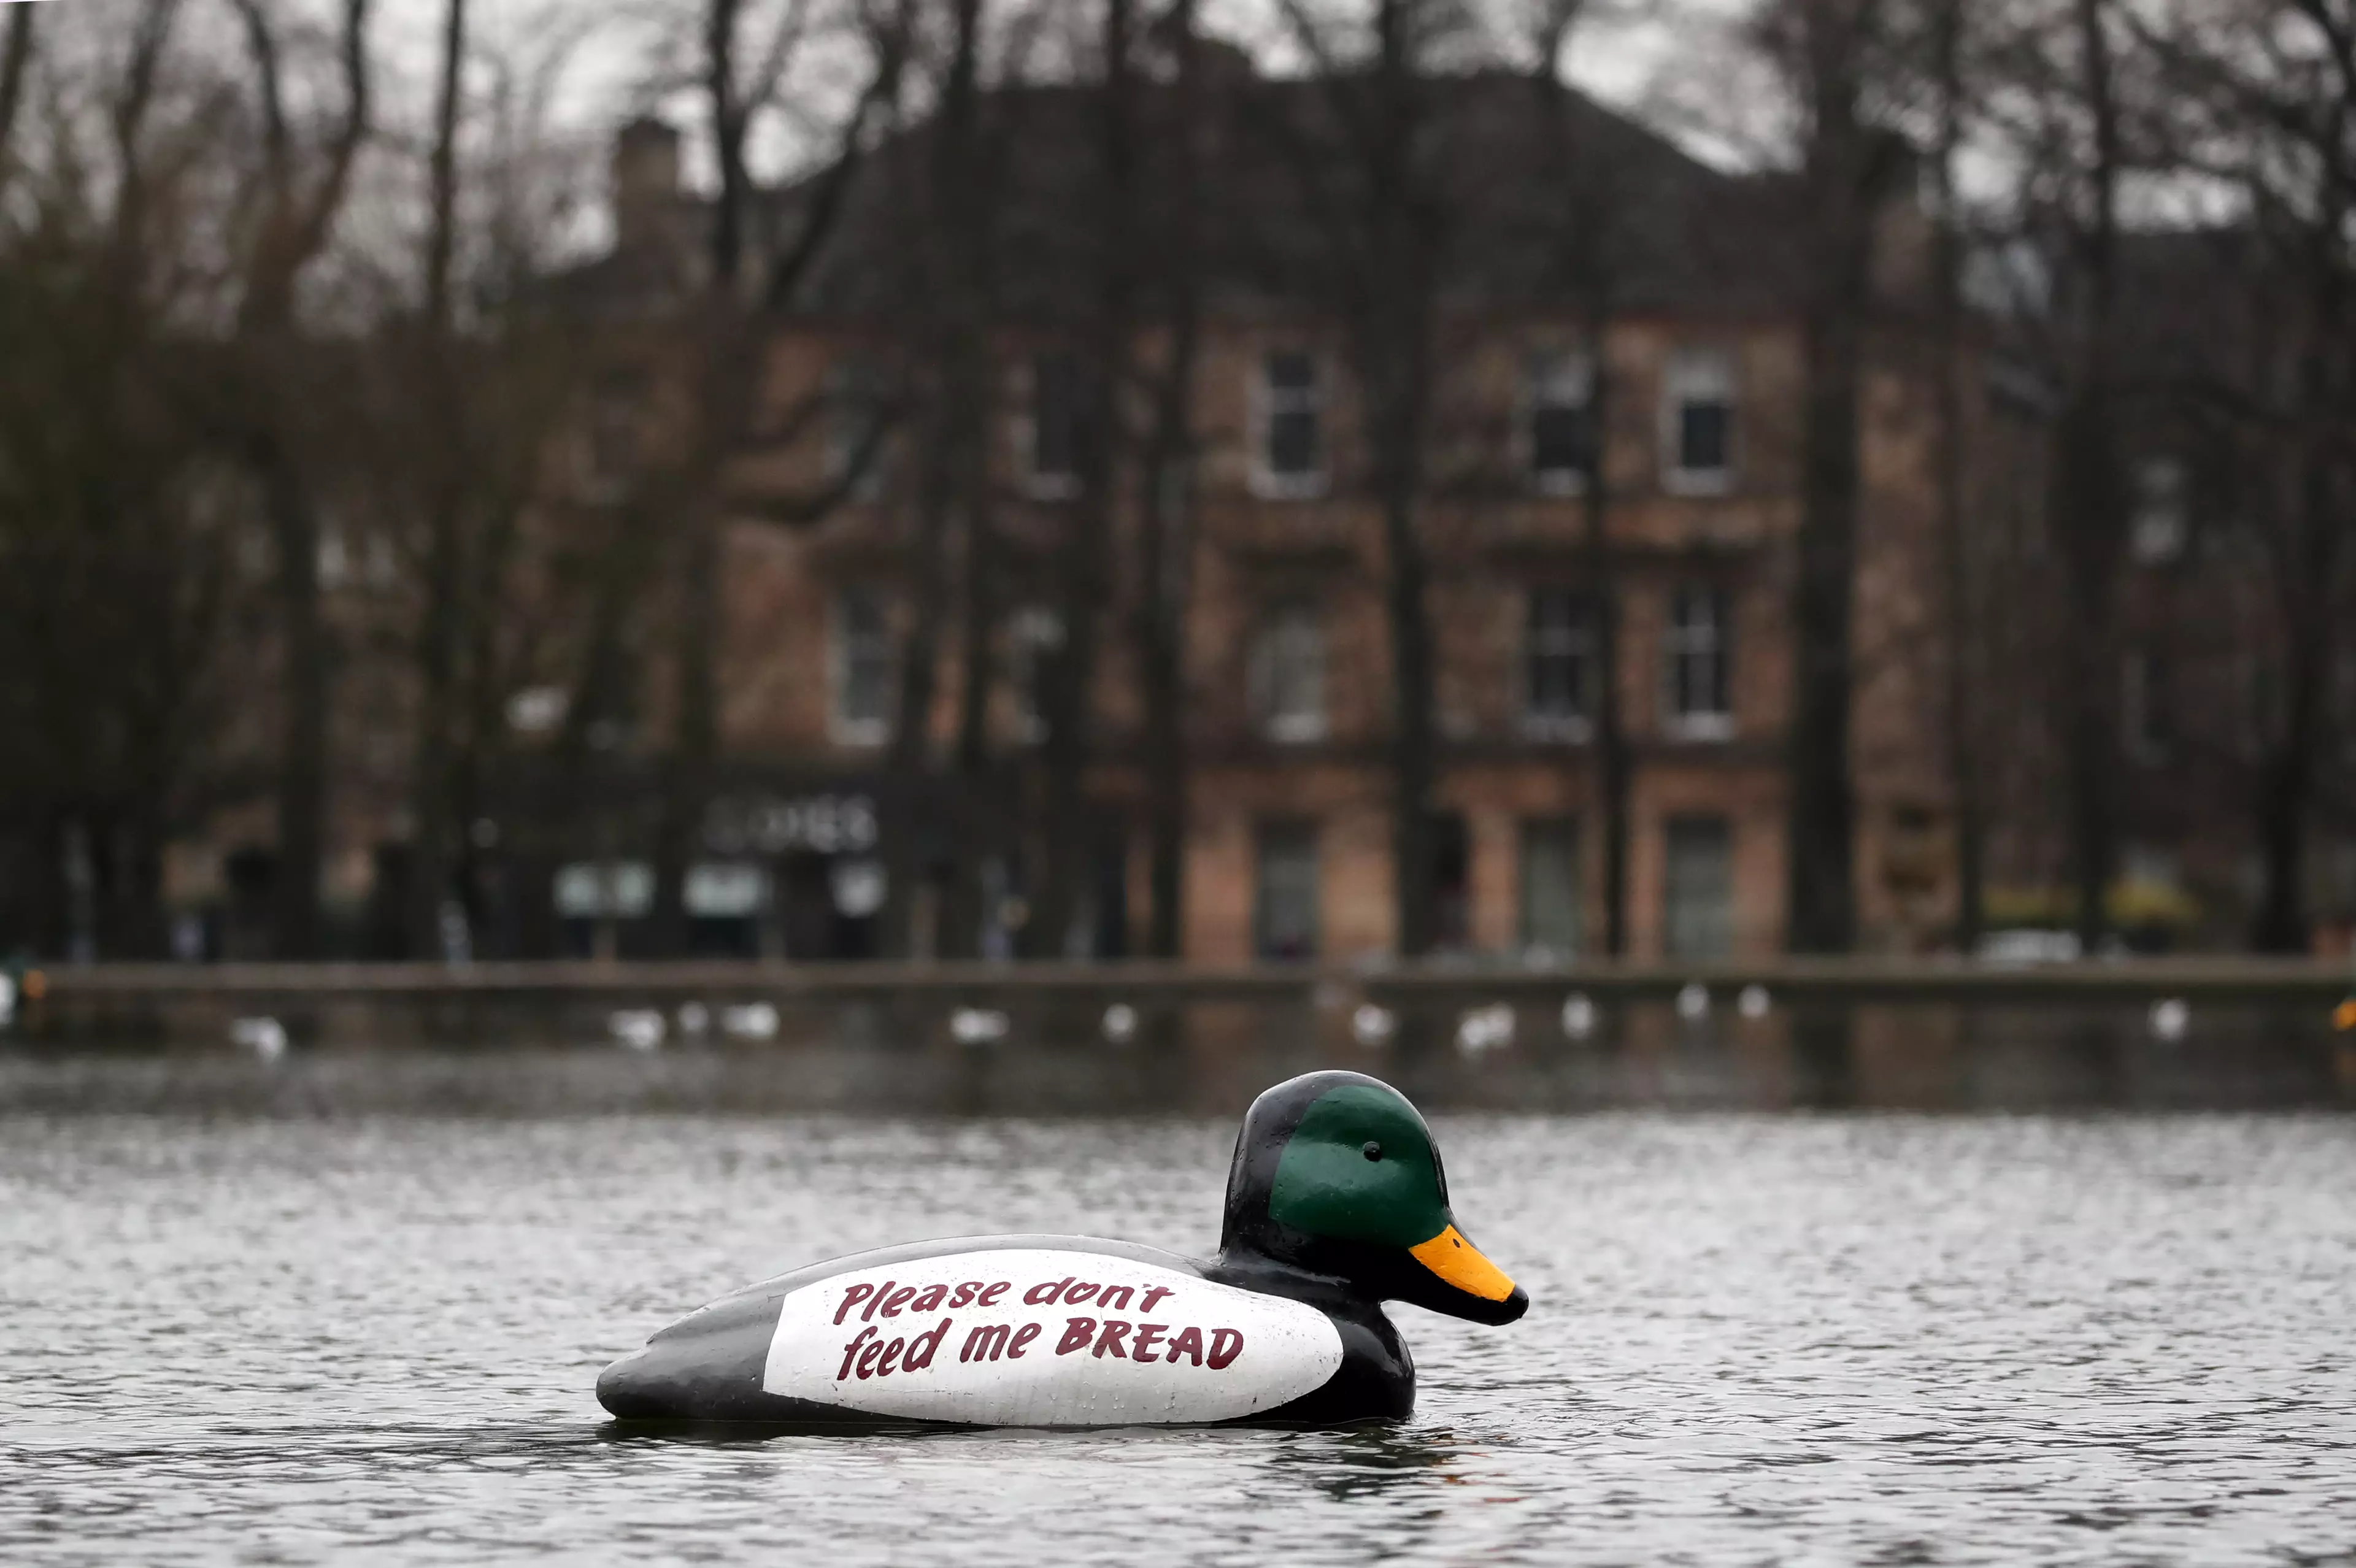 Giant plastic ducks were placed in the pond in Queens Park, Glasgow, to deter people from feeding the ducks bread.